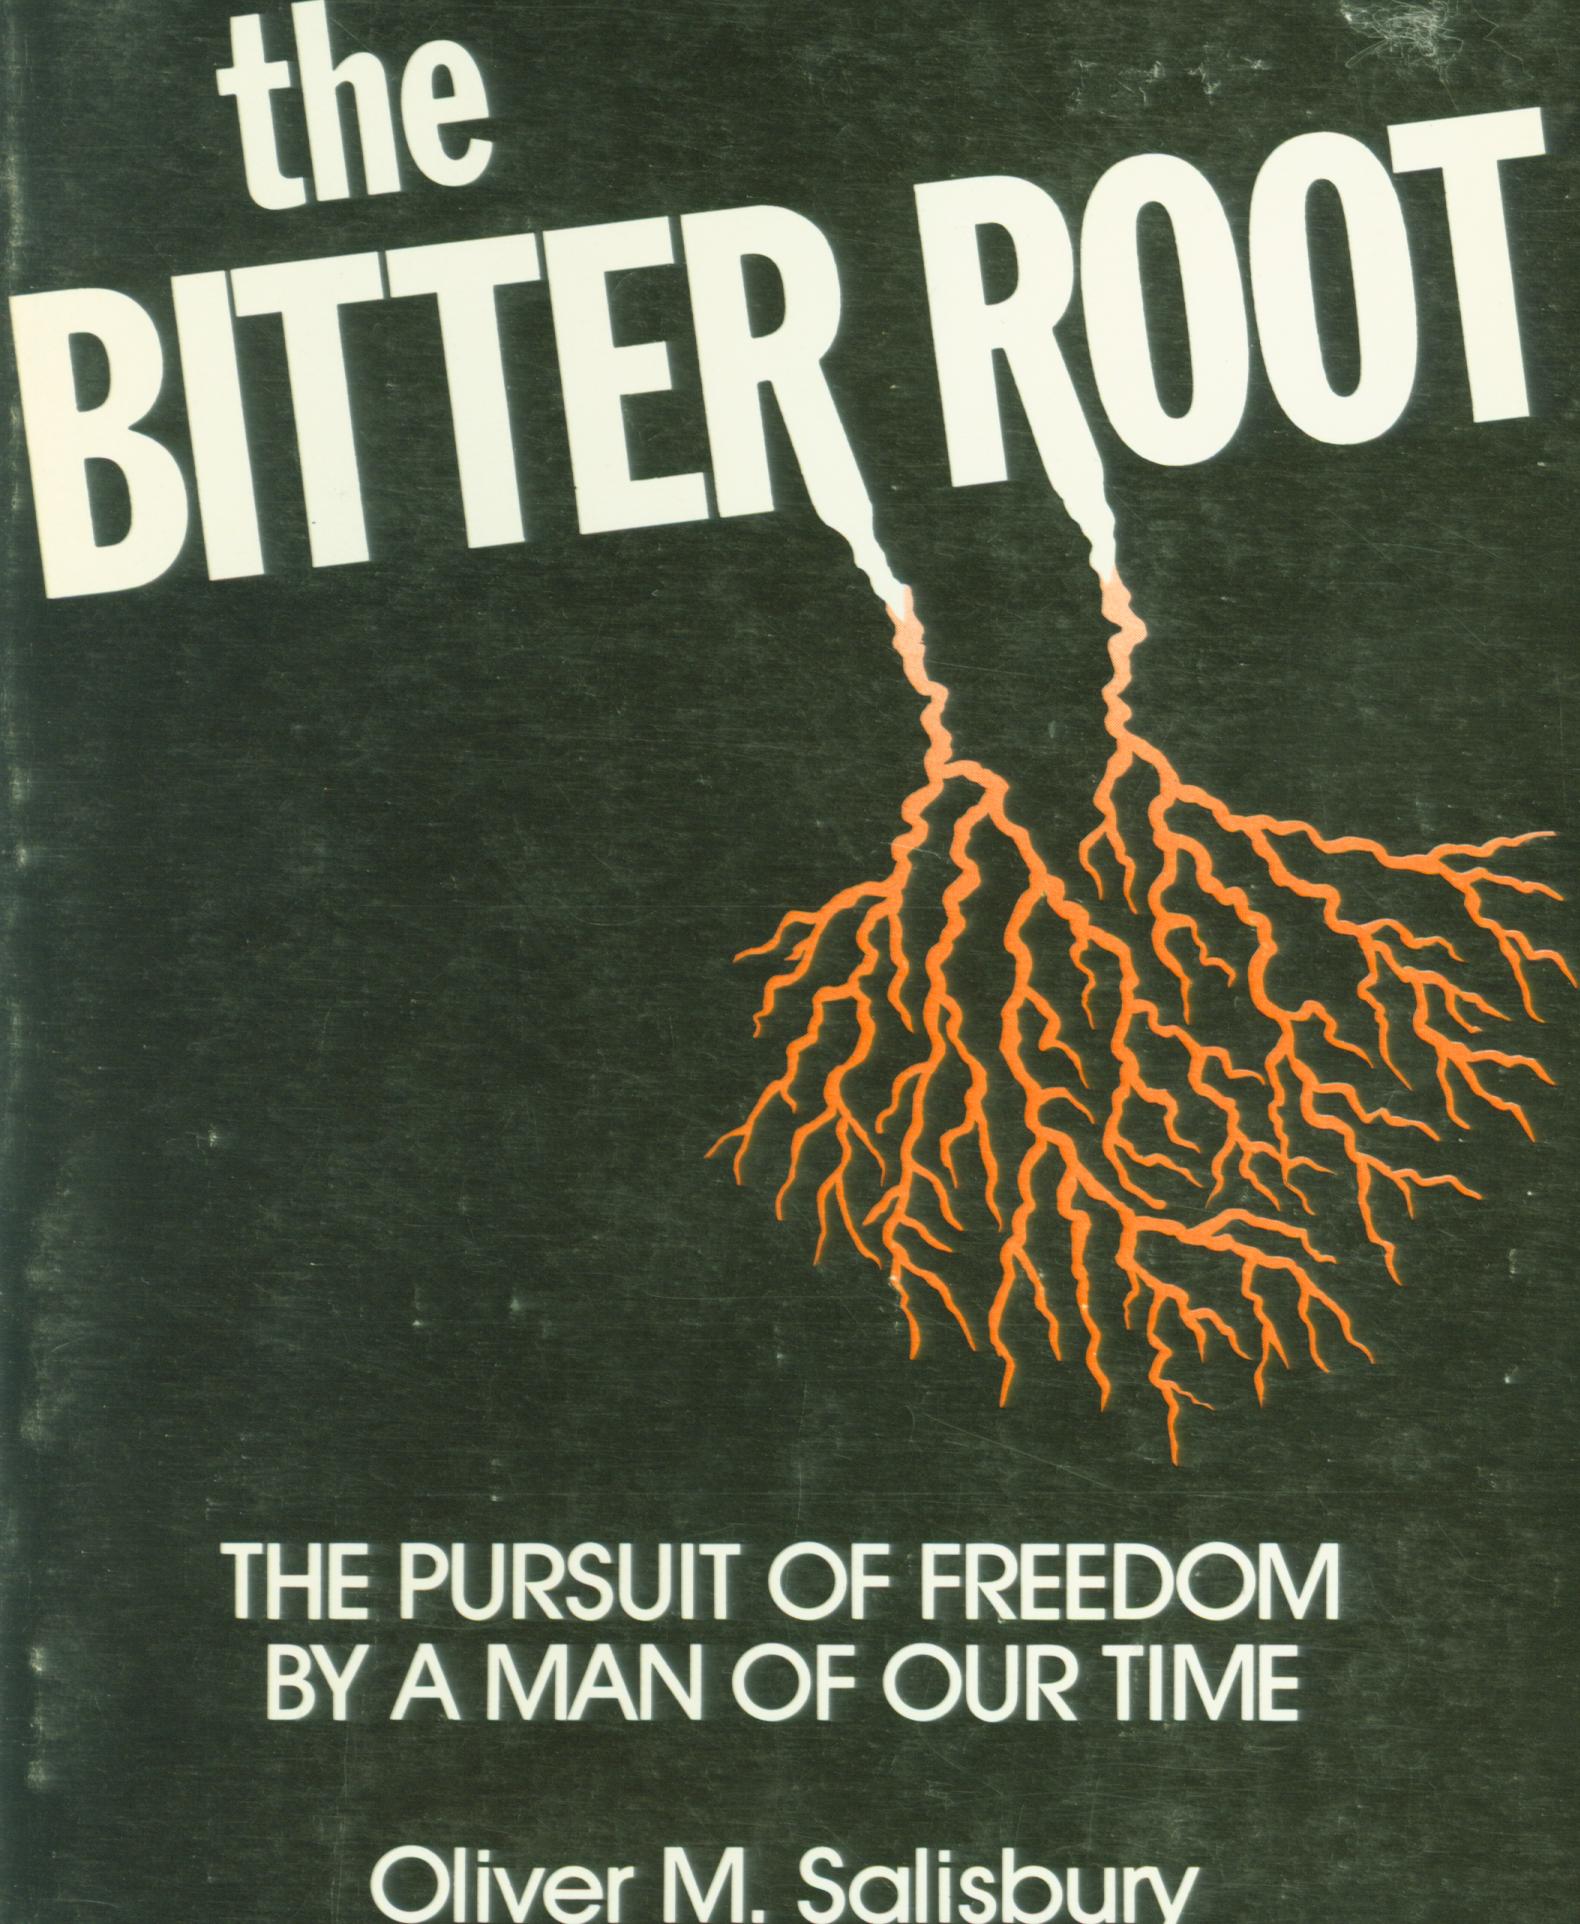 THE BITTER ROOT: the pursuit of freedom by a man of our time.